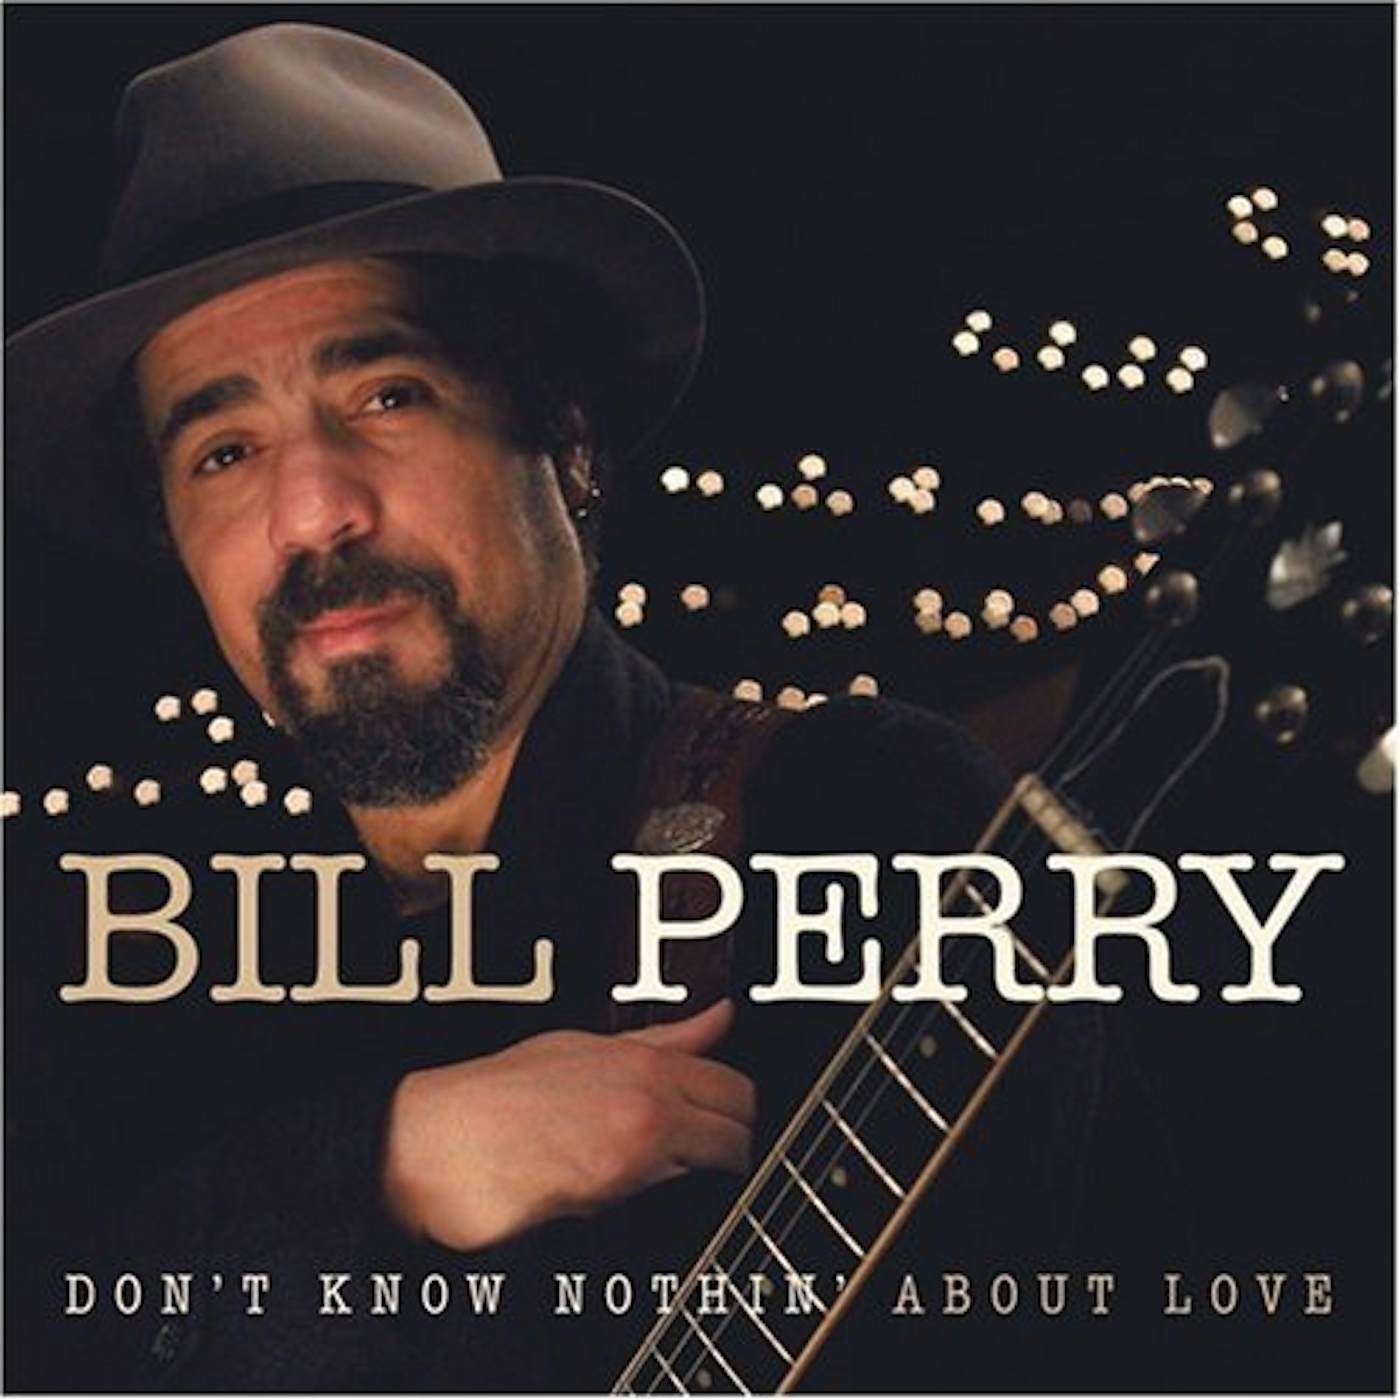 Bill Perry DON'T KNOW NOTHING ABOUT LOVE CD